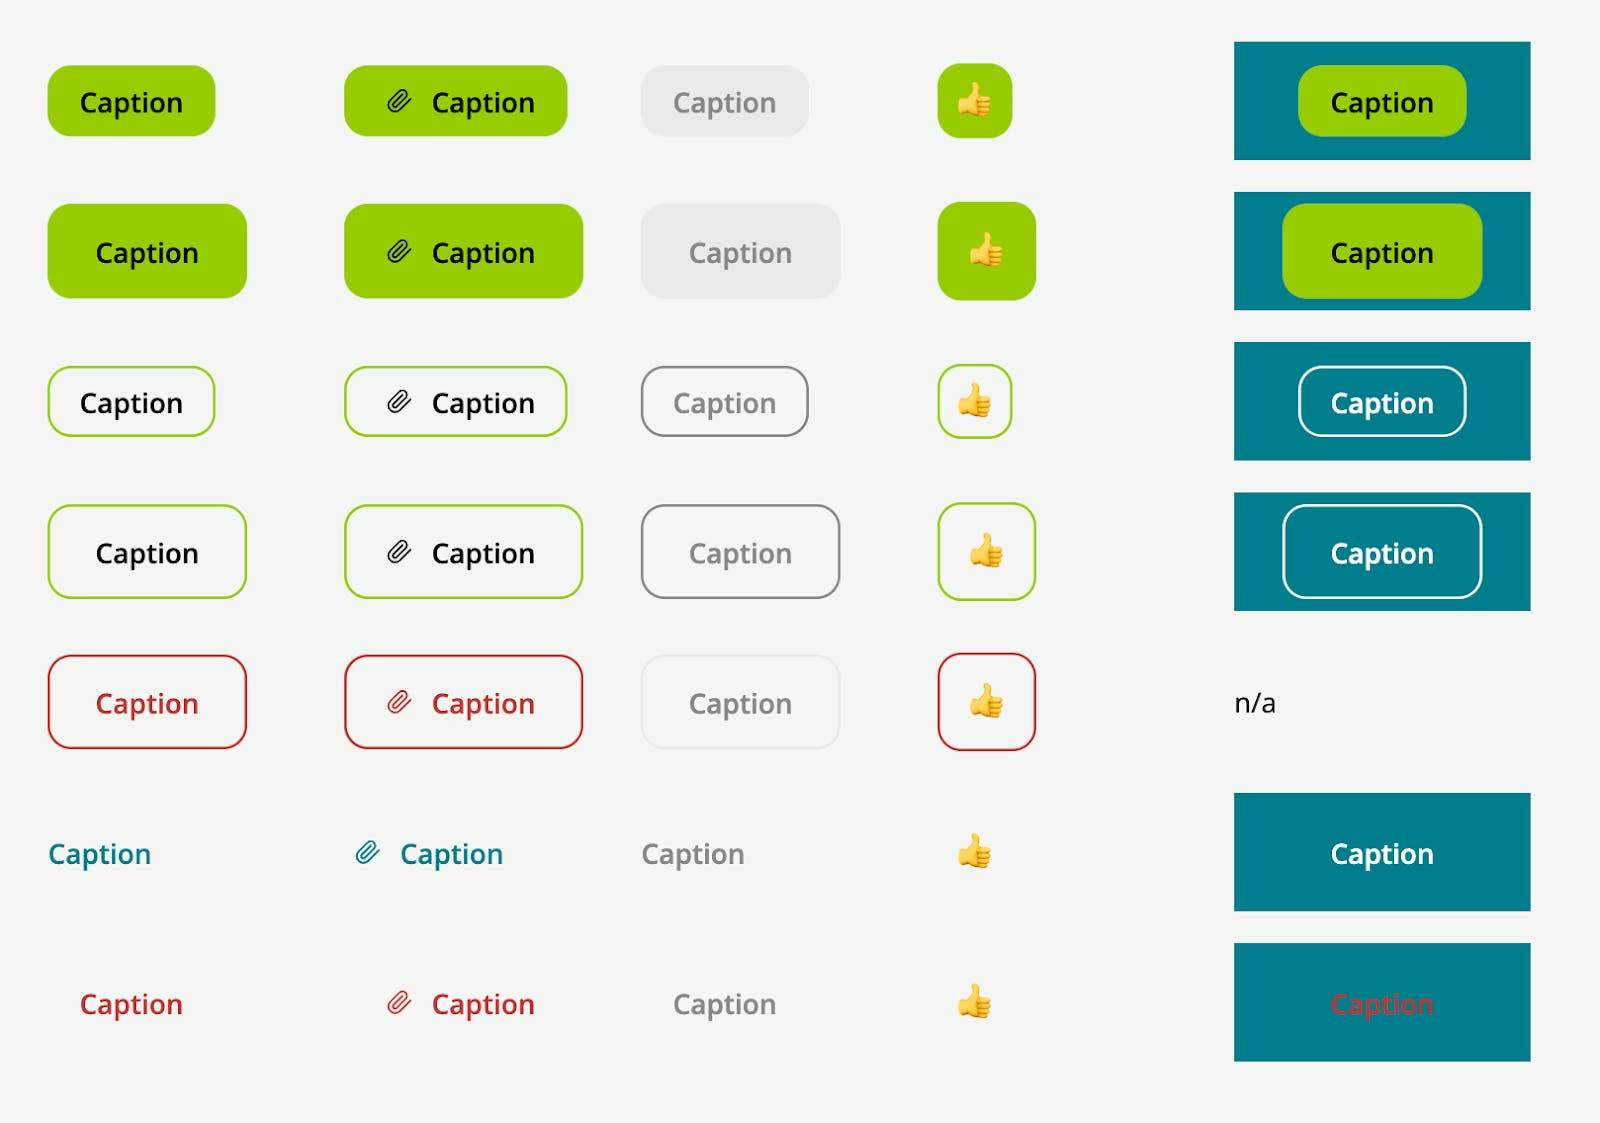 Buttons in design system